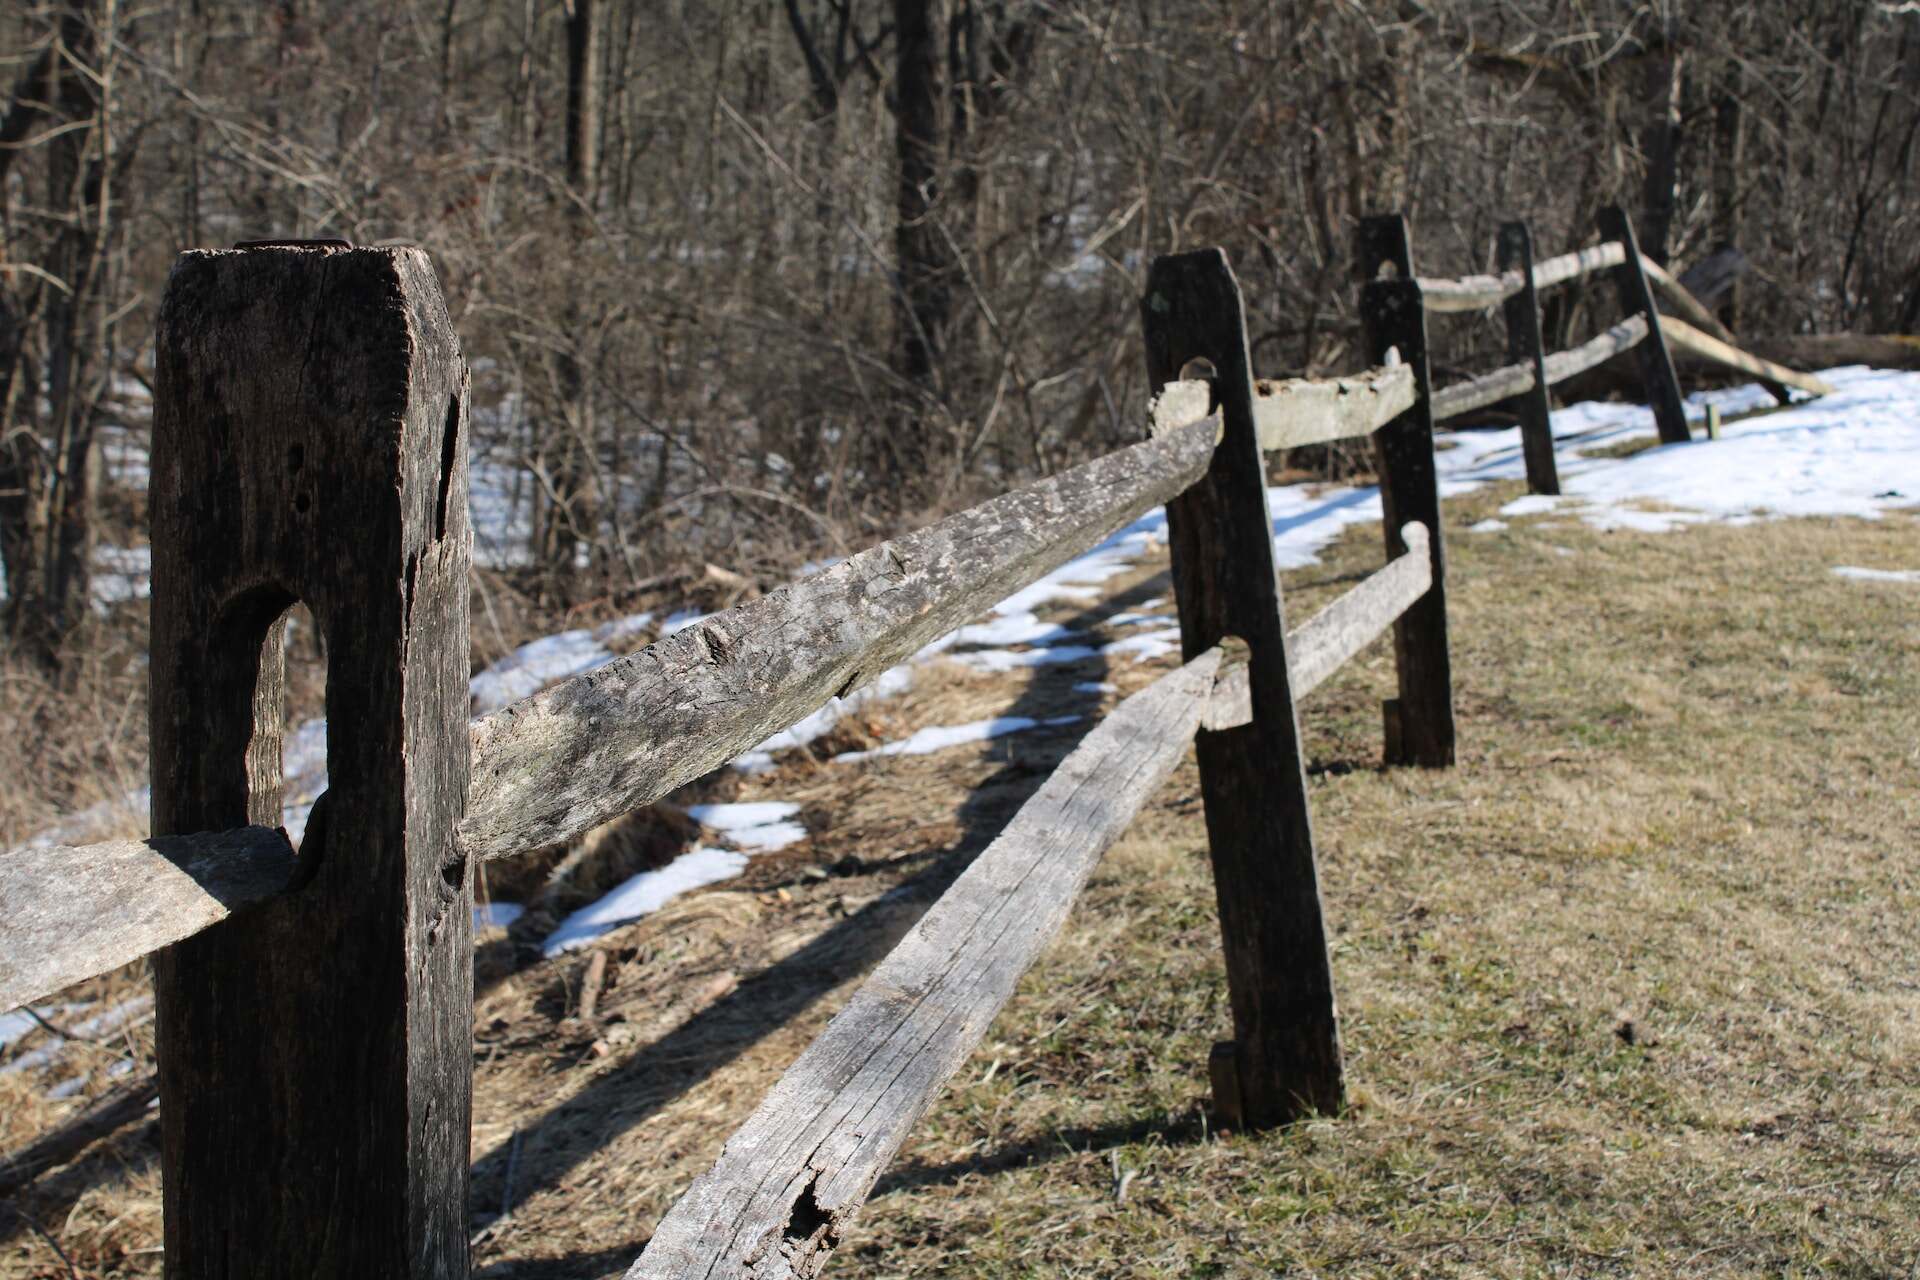 A split rail fence in a snowy forest